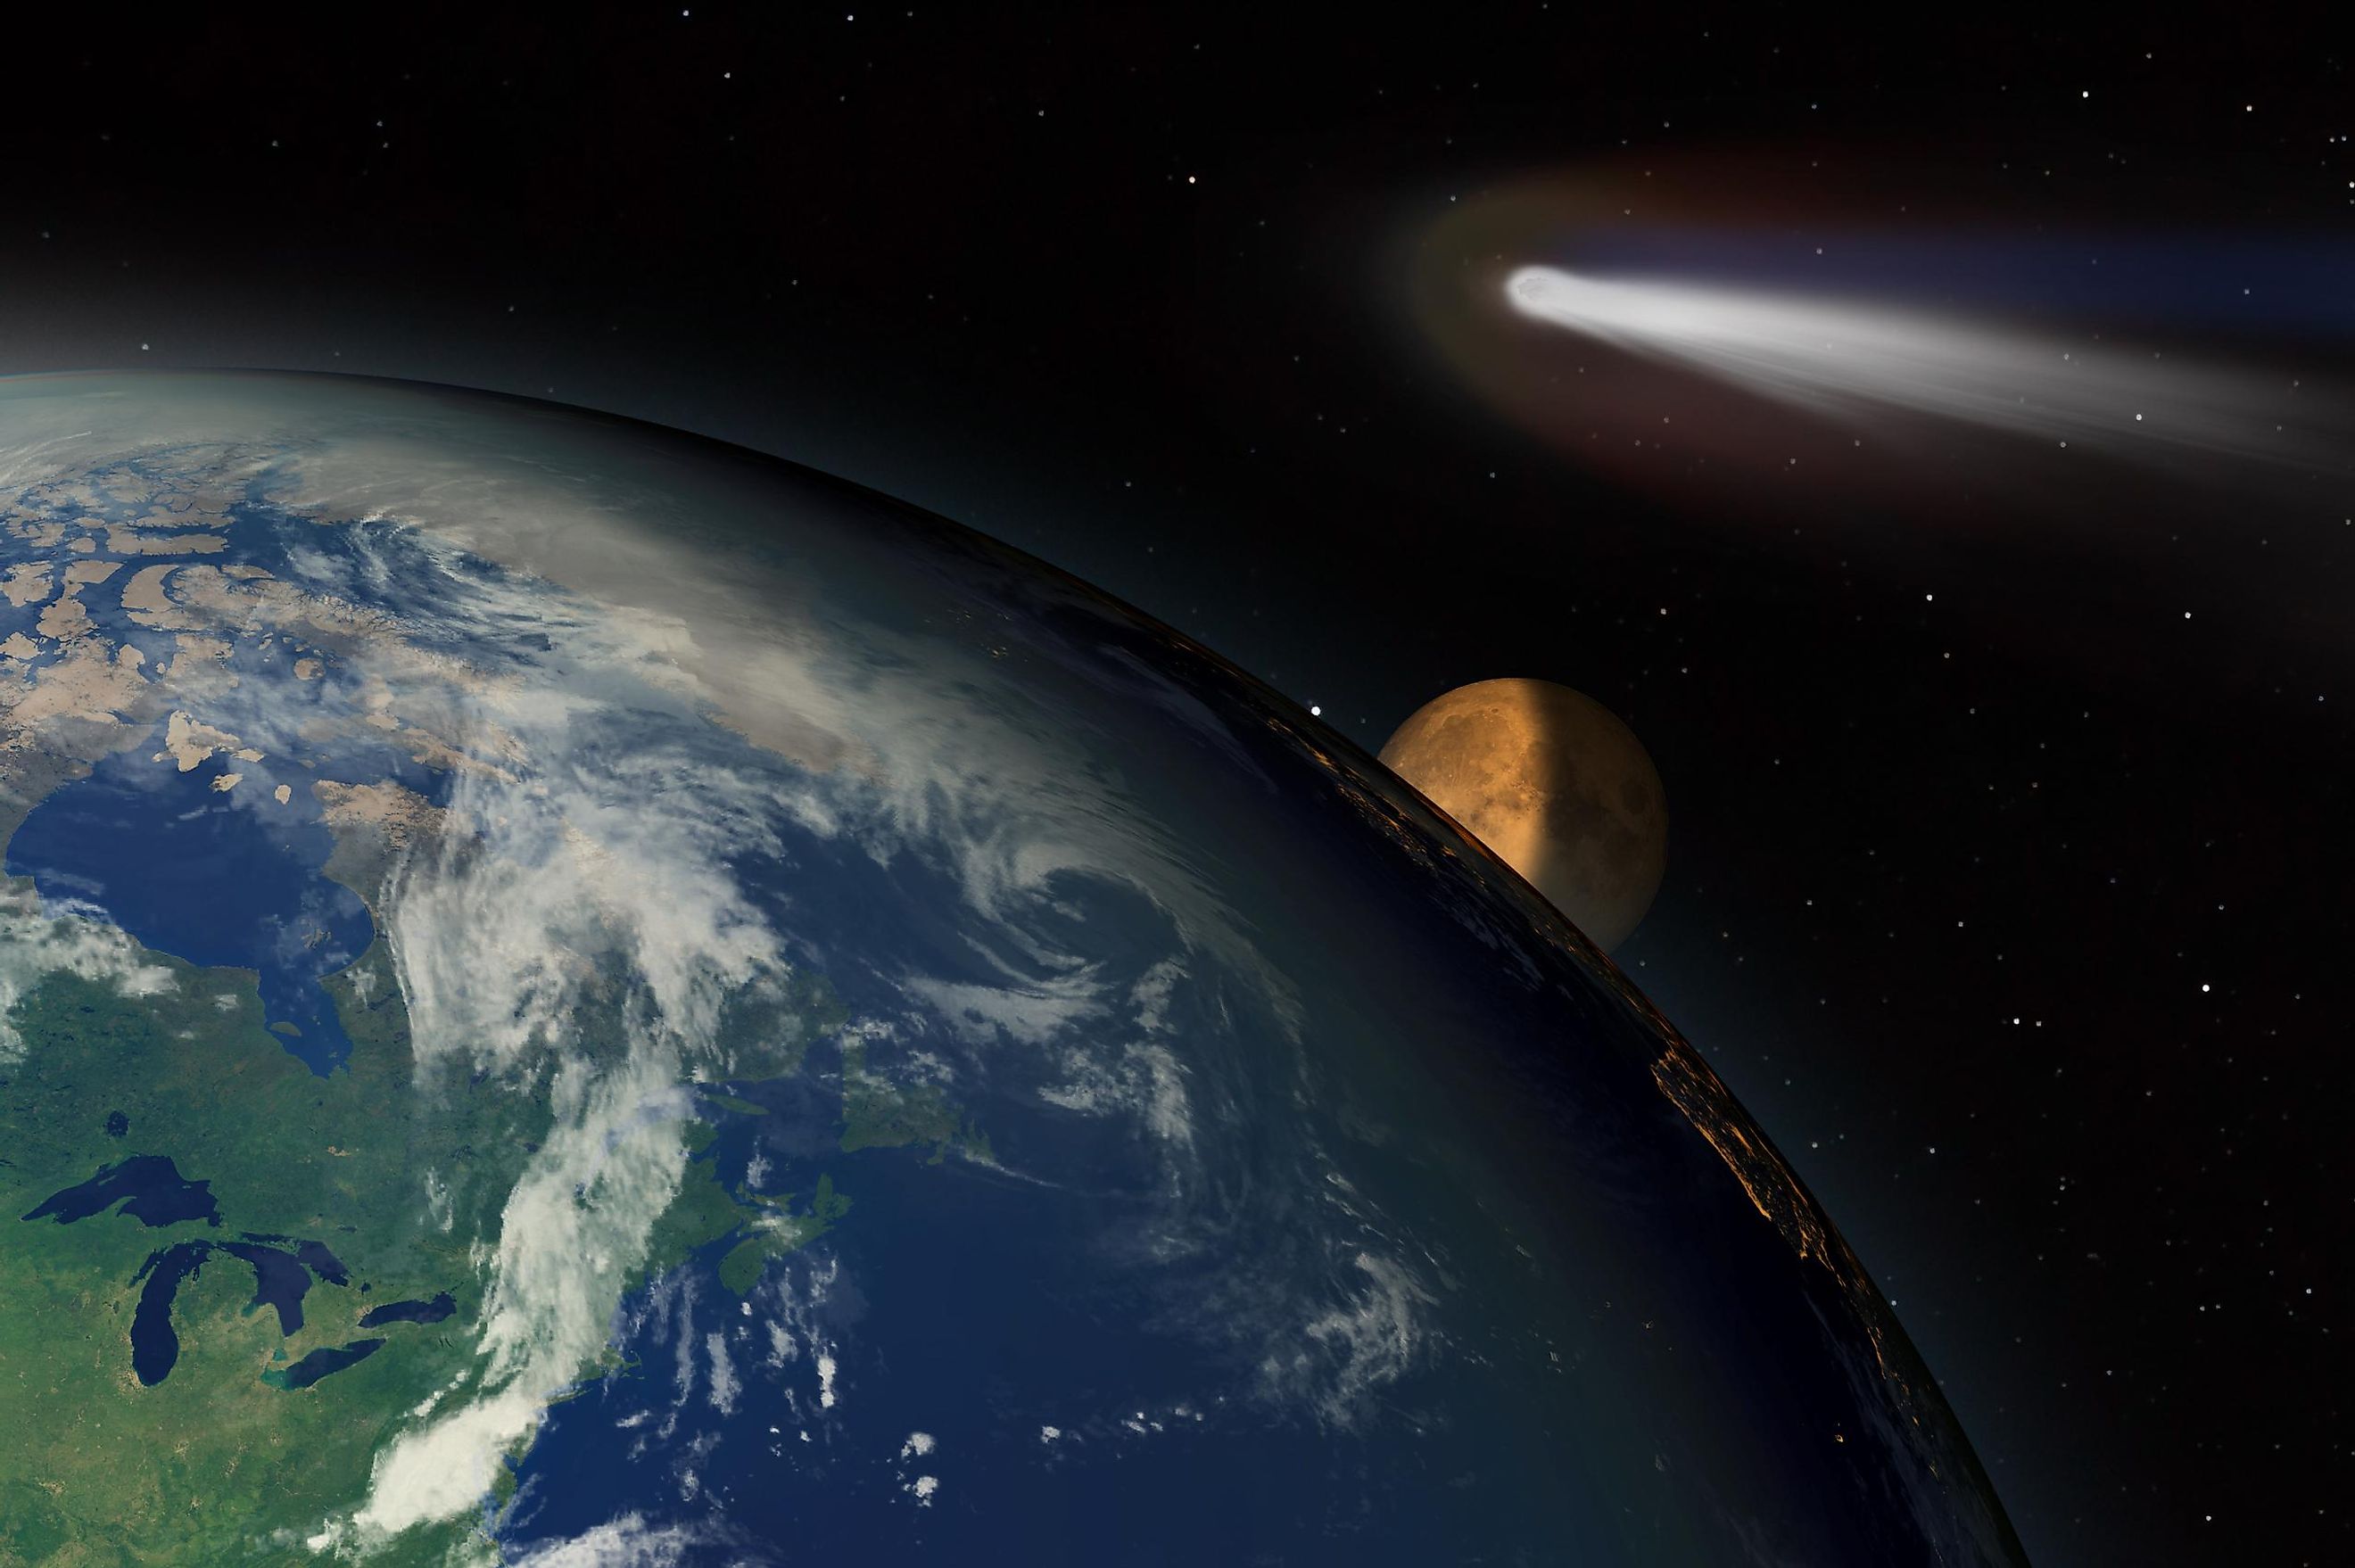 An Illustration of a Comet Passing Near Earth and the Moon